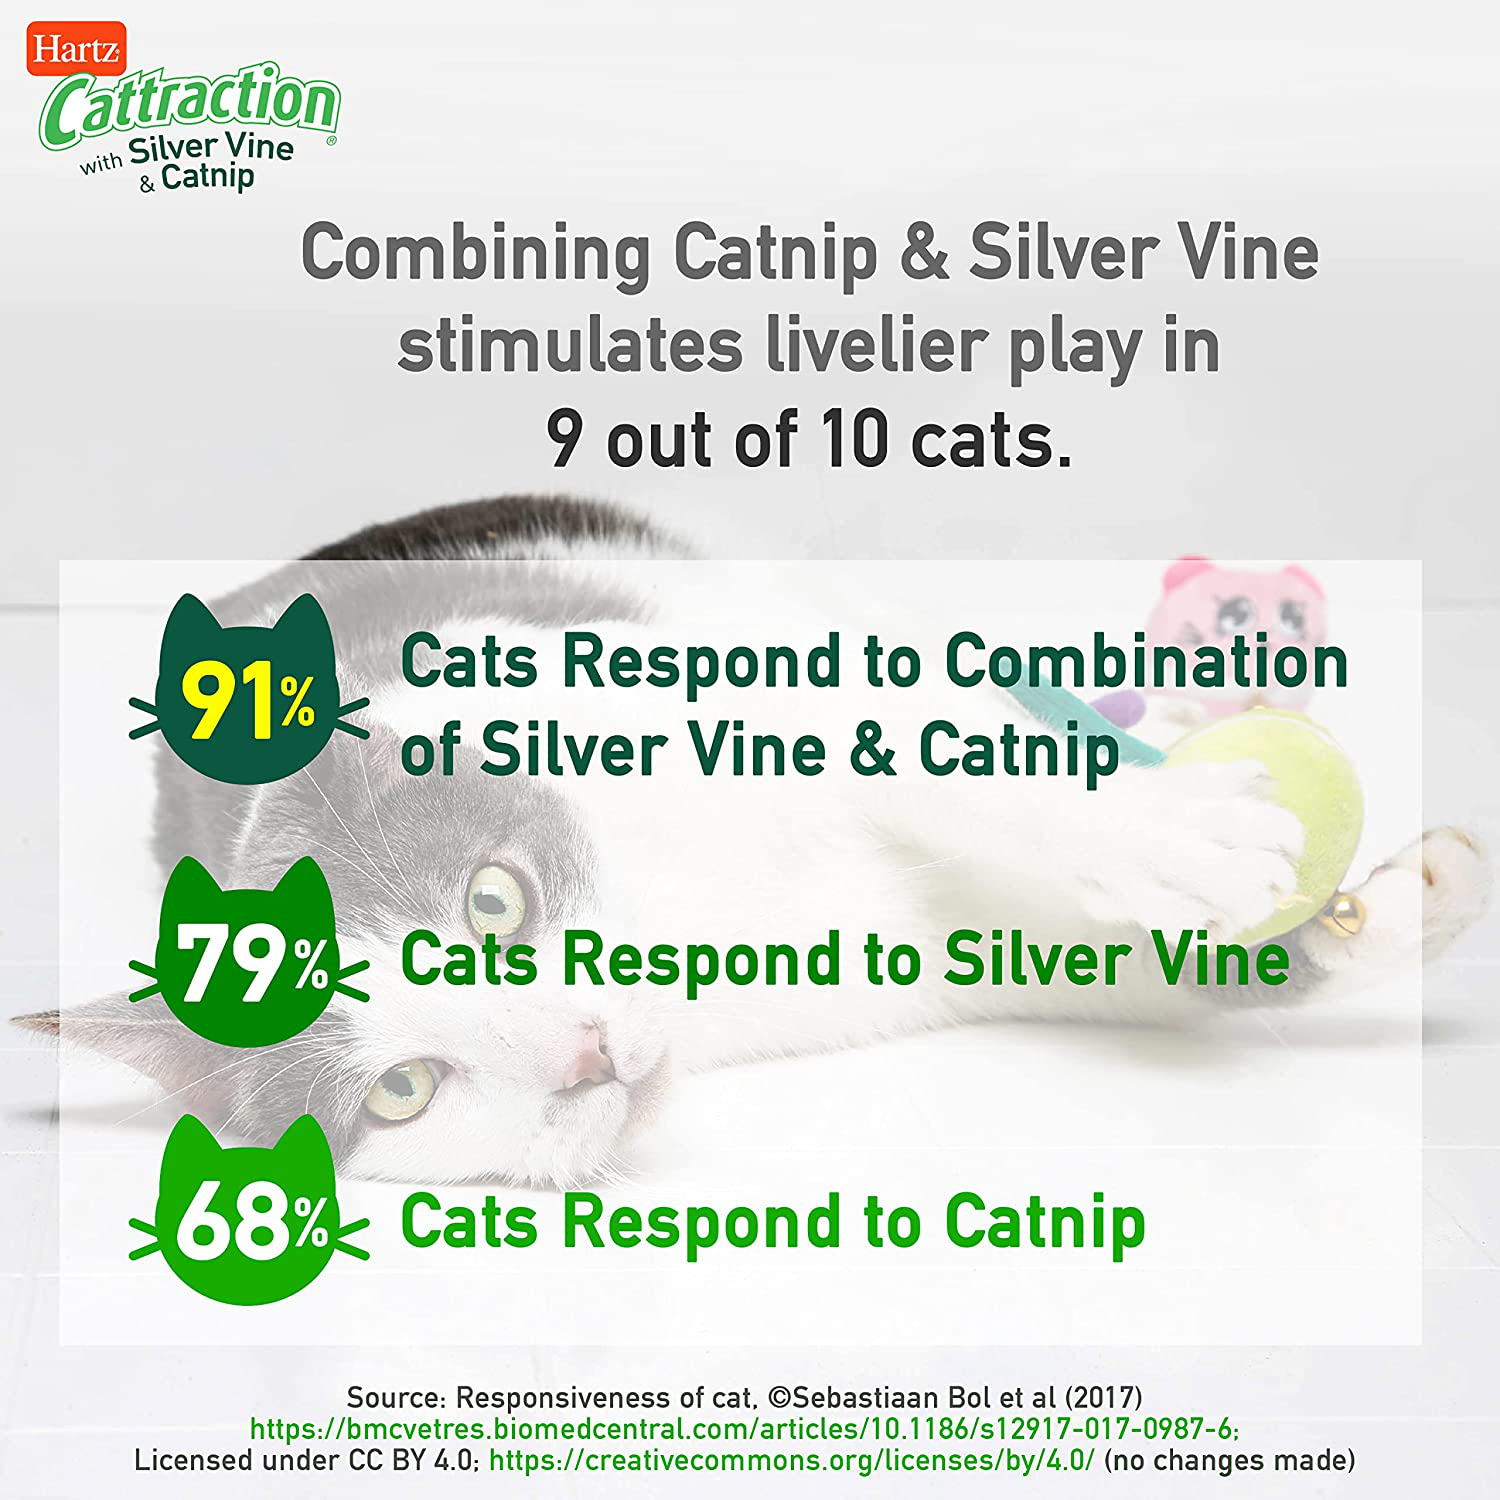 Hartz Cattraction Cat Toys with Silver Vine and Catnip for Livelier Play for Cats and Kittens, Multiple Styles Animals & Pet Supplies > Pet Supplies > Cat Supplies > Cat Toys Hartz   